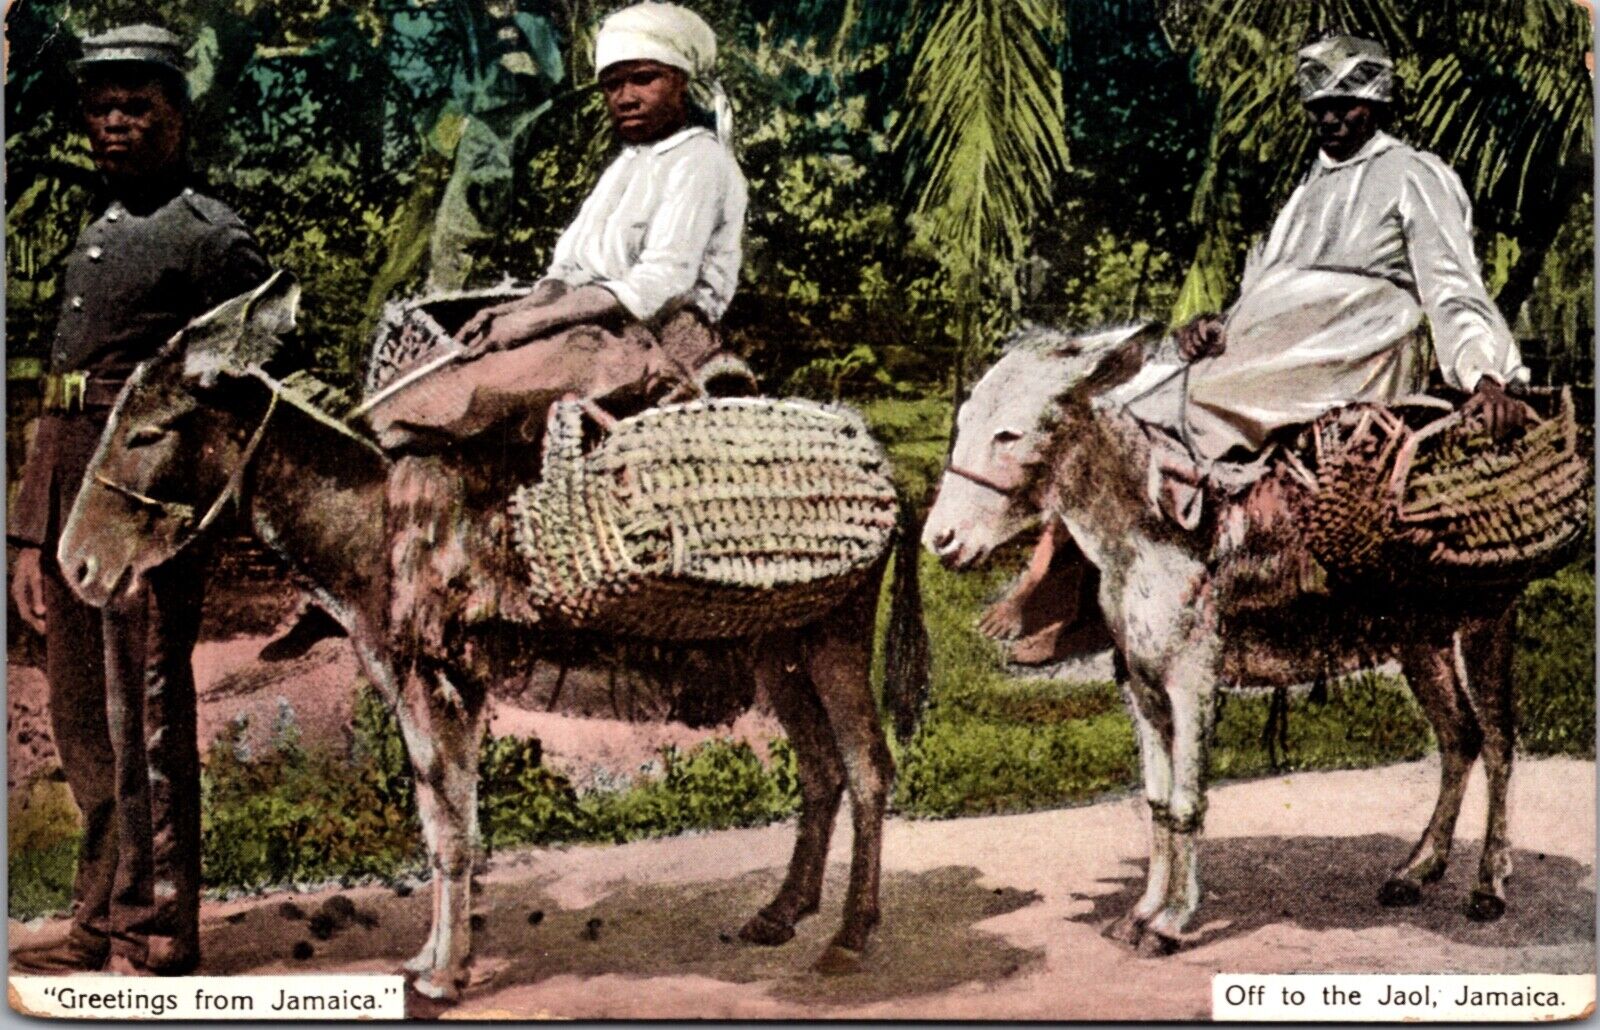 Postcard Greetings From Jamaica, Off To The Jail, People Riding Donkeys